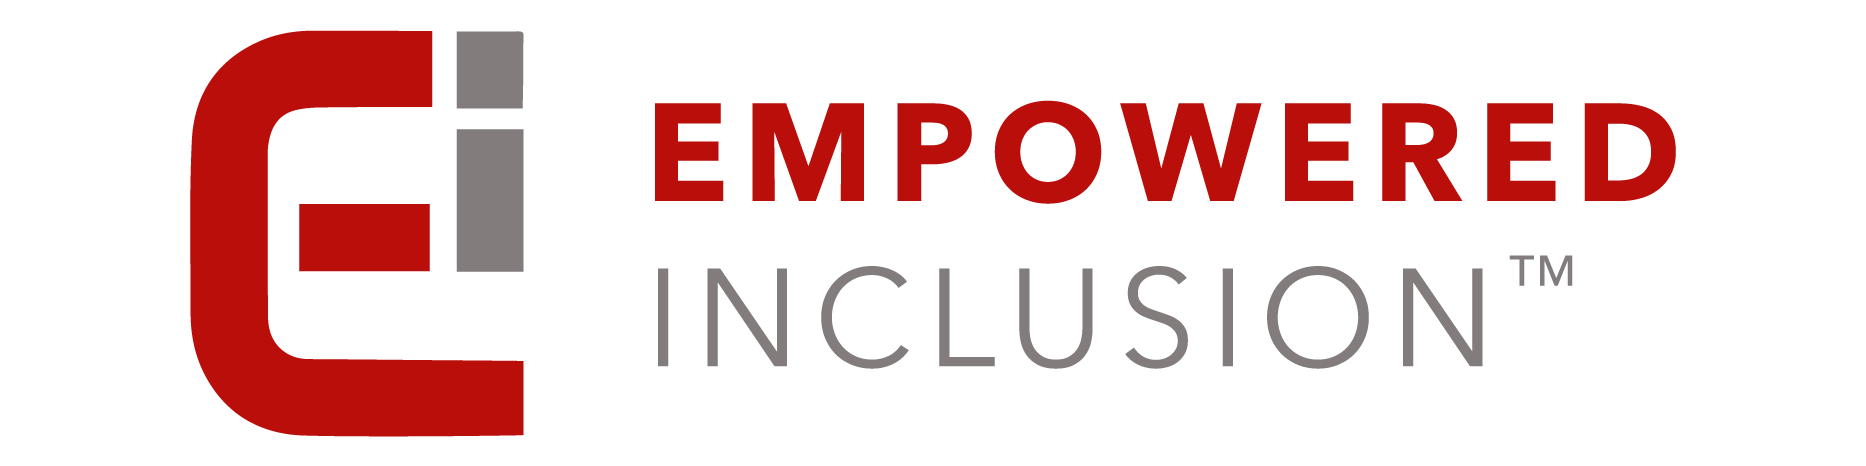 EMPOWERED INCLUSION